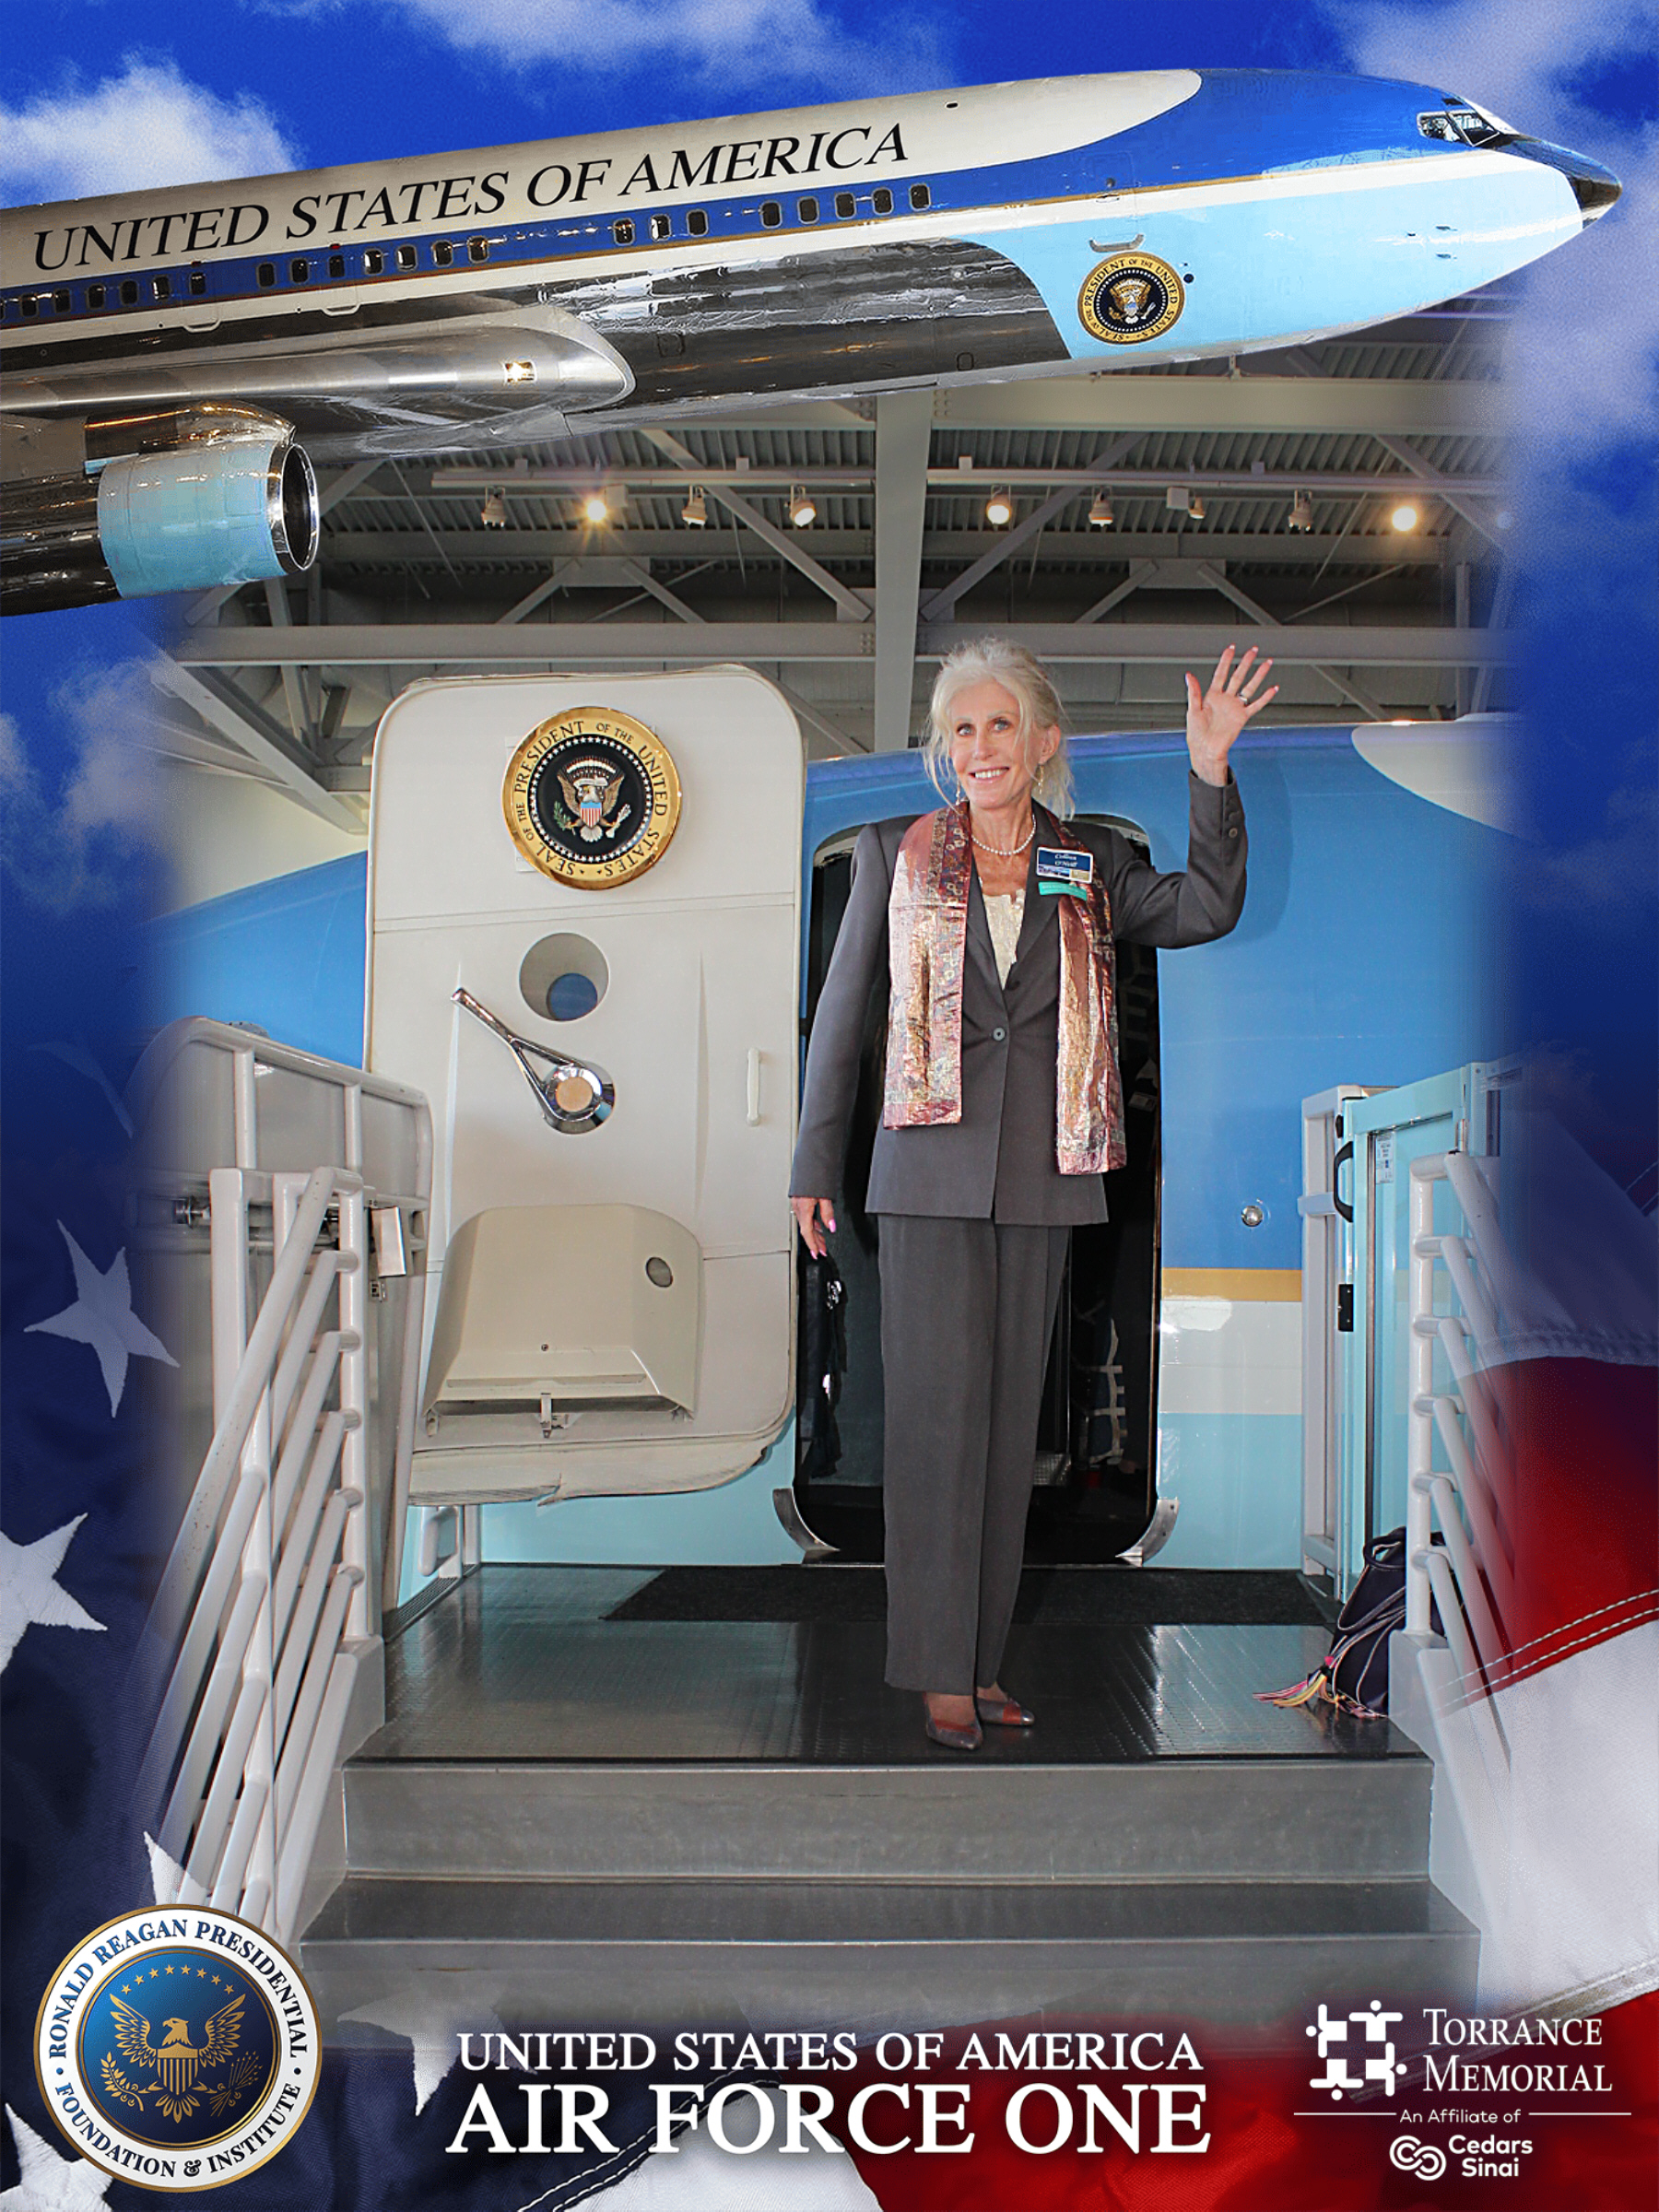 Colleen O'Neill on Air Force One at the Ronald Reagan Presidential Library and Museum